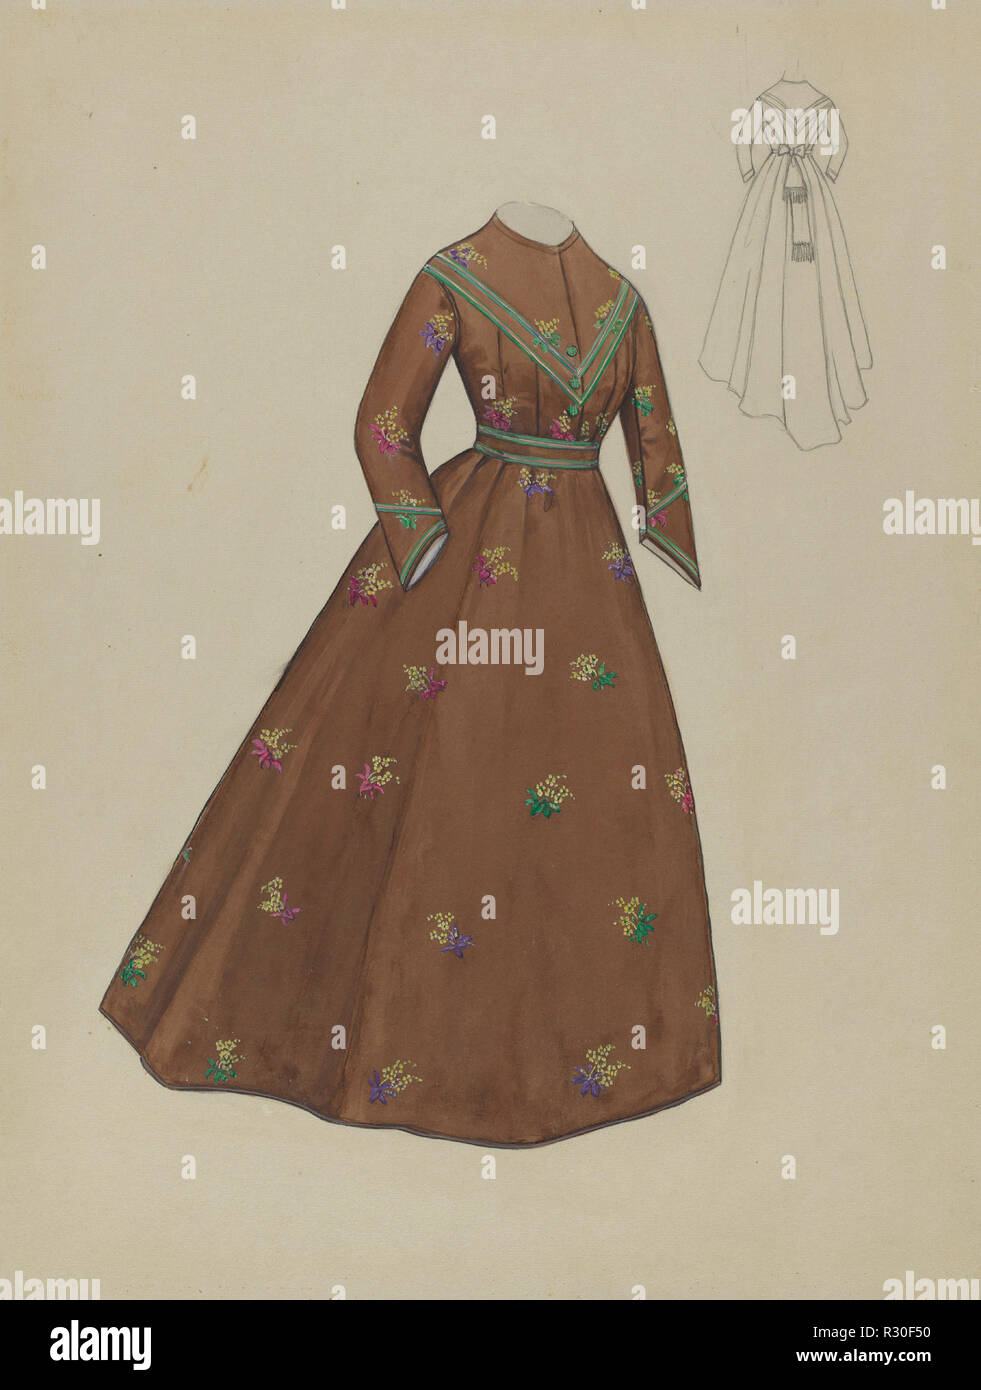 Dress. Dated: c. 1936. Dimensions: overall: 29.8 x 23 cm (11 3/4 x 9 1/16 in.). Medium: watercolor, goauche, and graphite on paperboard. Museum: National Gallery of Art, Washington DC. Author: Jessie M. Benge. Stock Photo